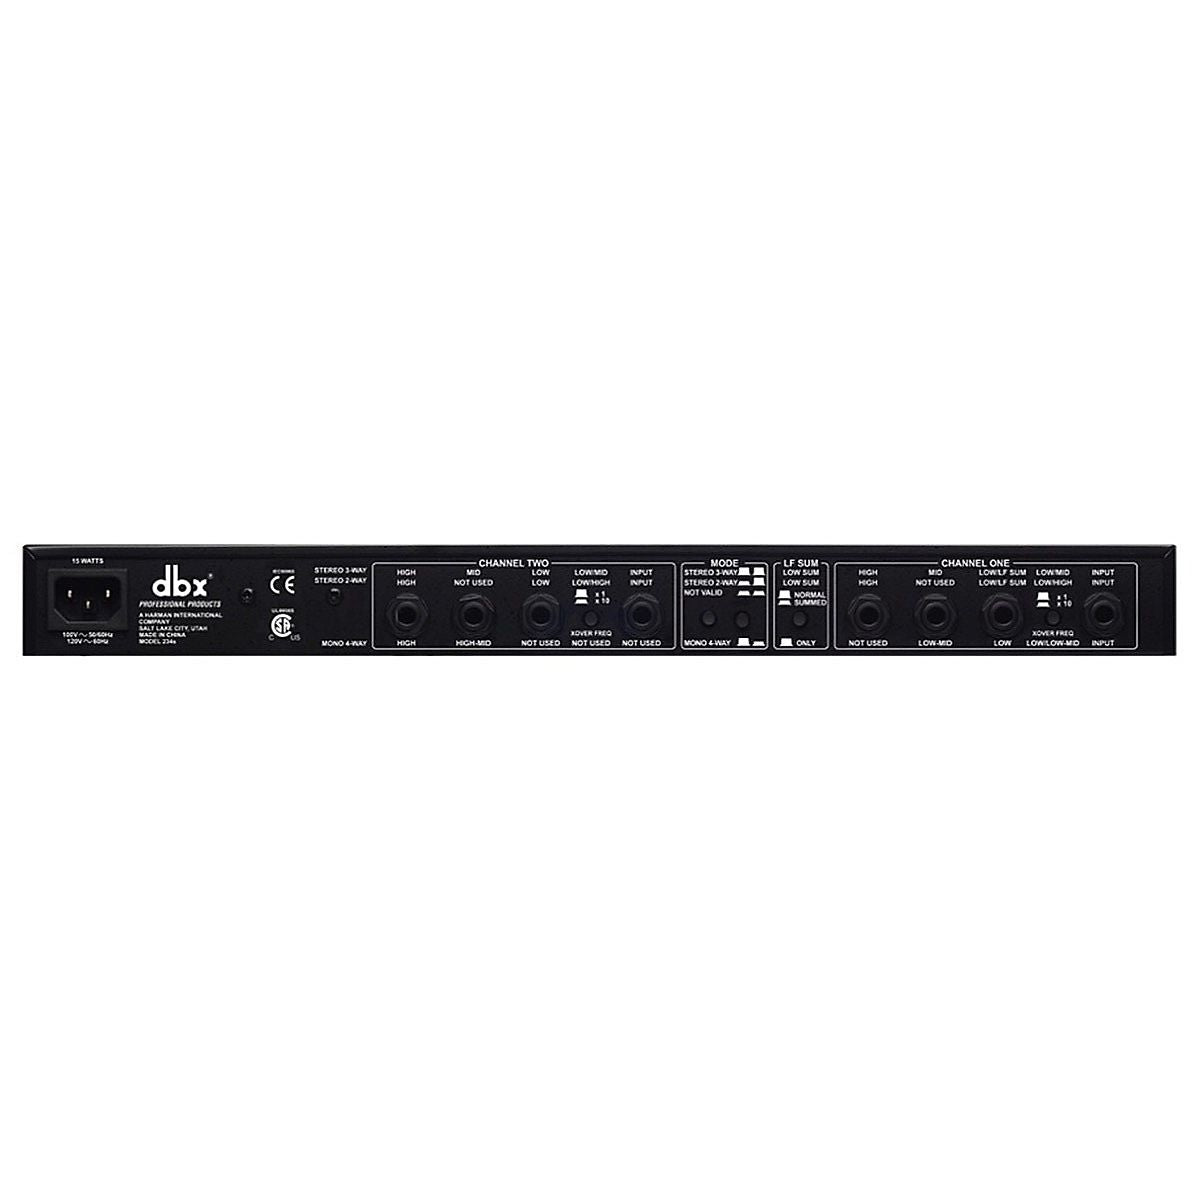 dbx 234S Crossover, Stereo 2-Way, 3-Way and Mono 4-Way